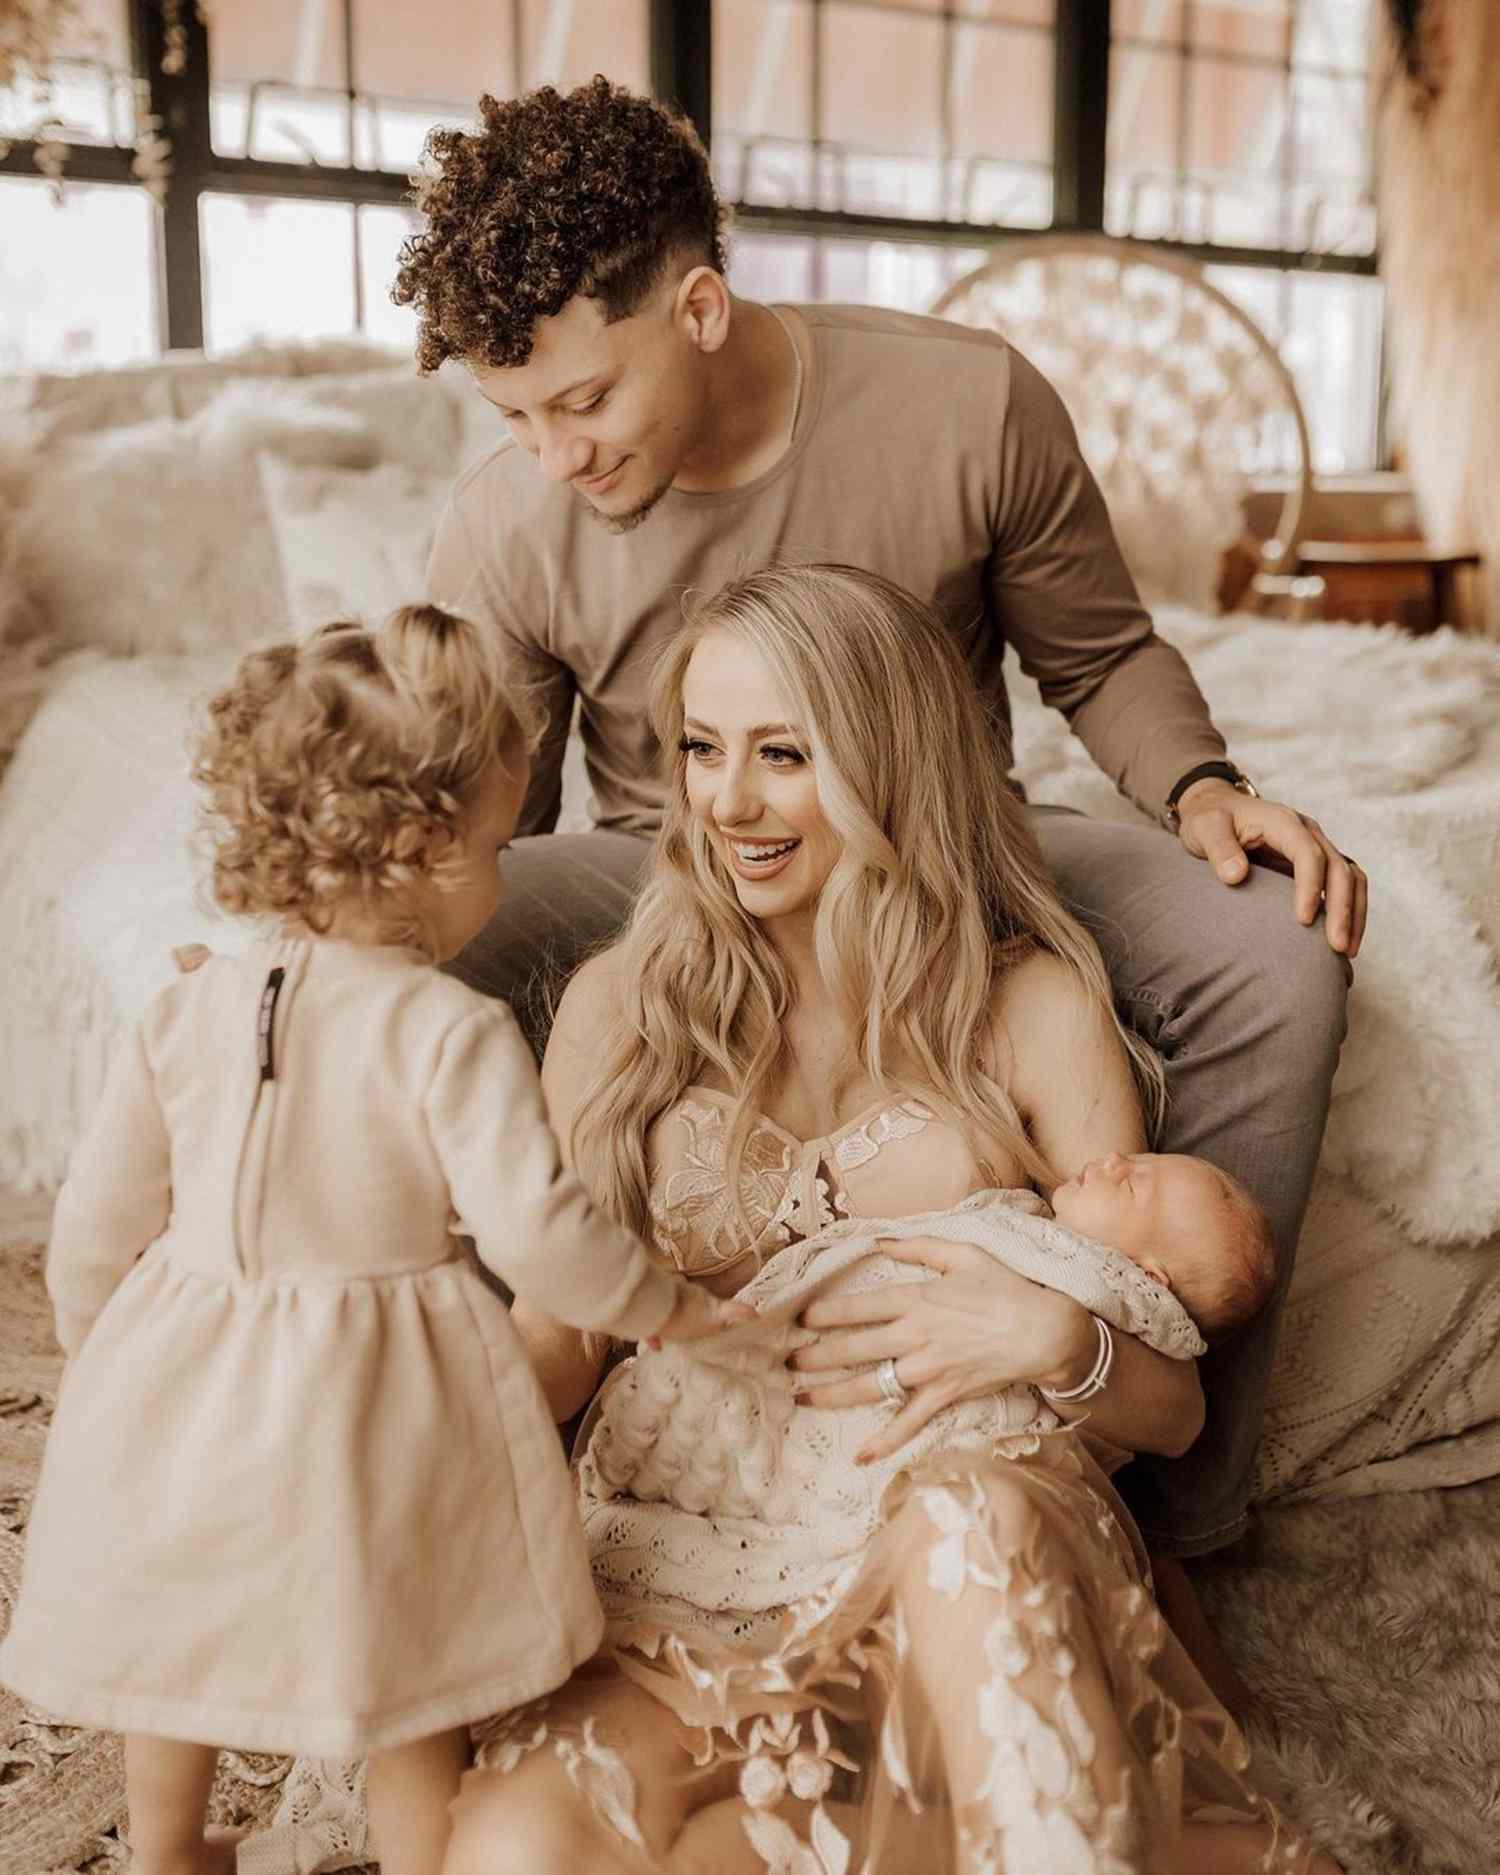 Patrick Mahomes revealed his wife Brittany's pregnancy, saying, "2 weeks gone," and they are expecting another boy - Mnews